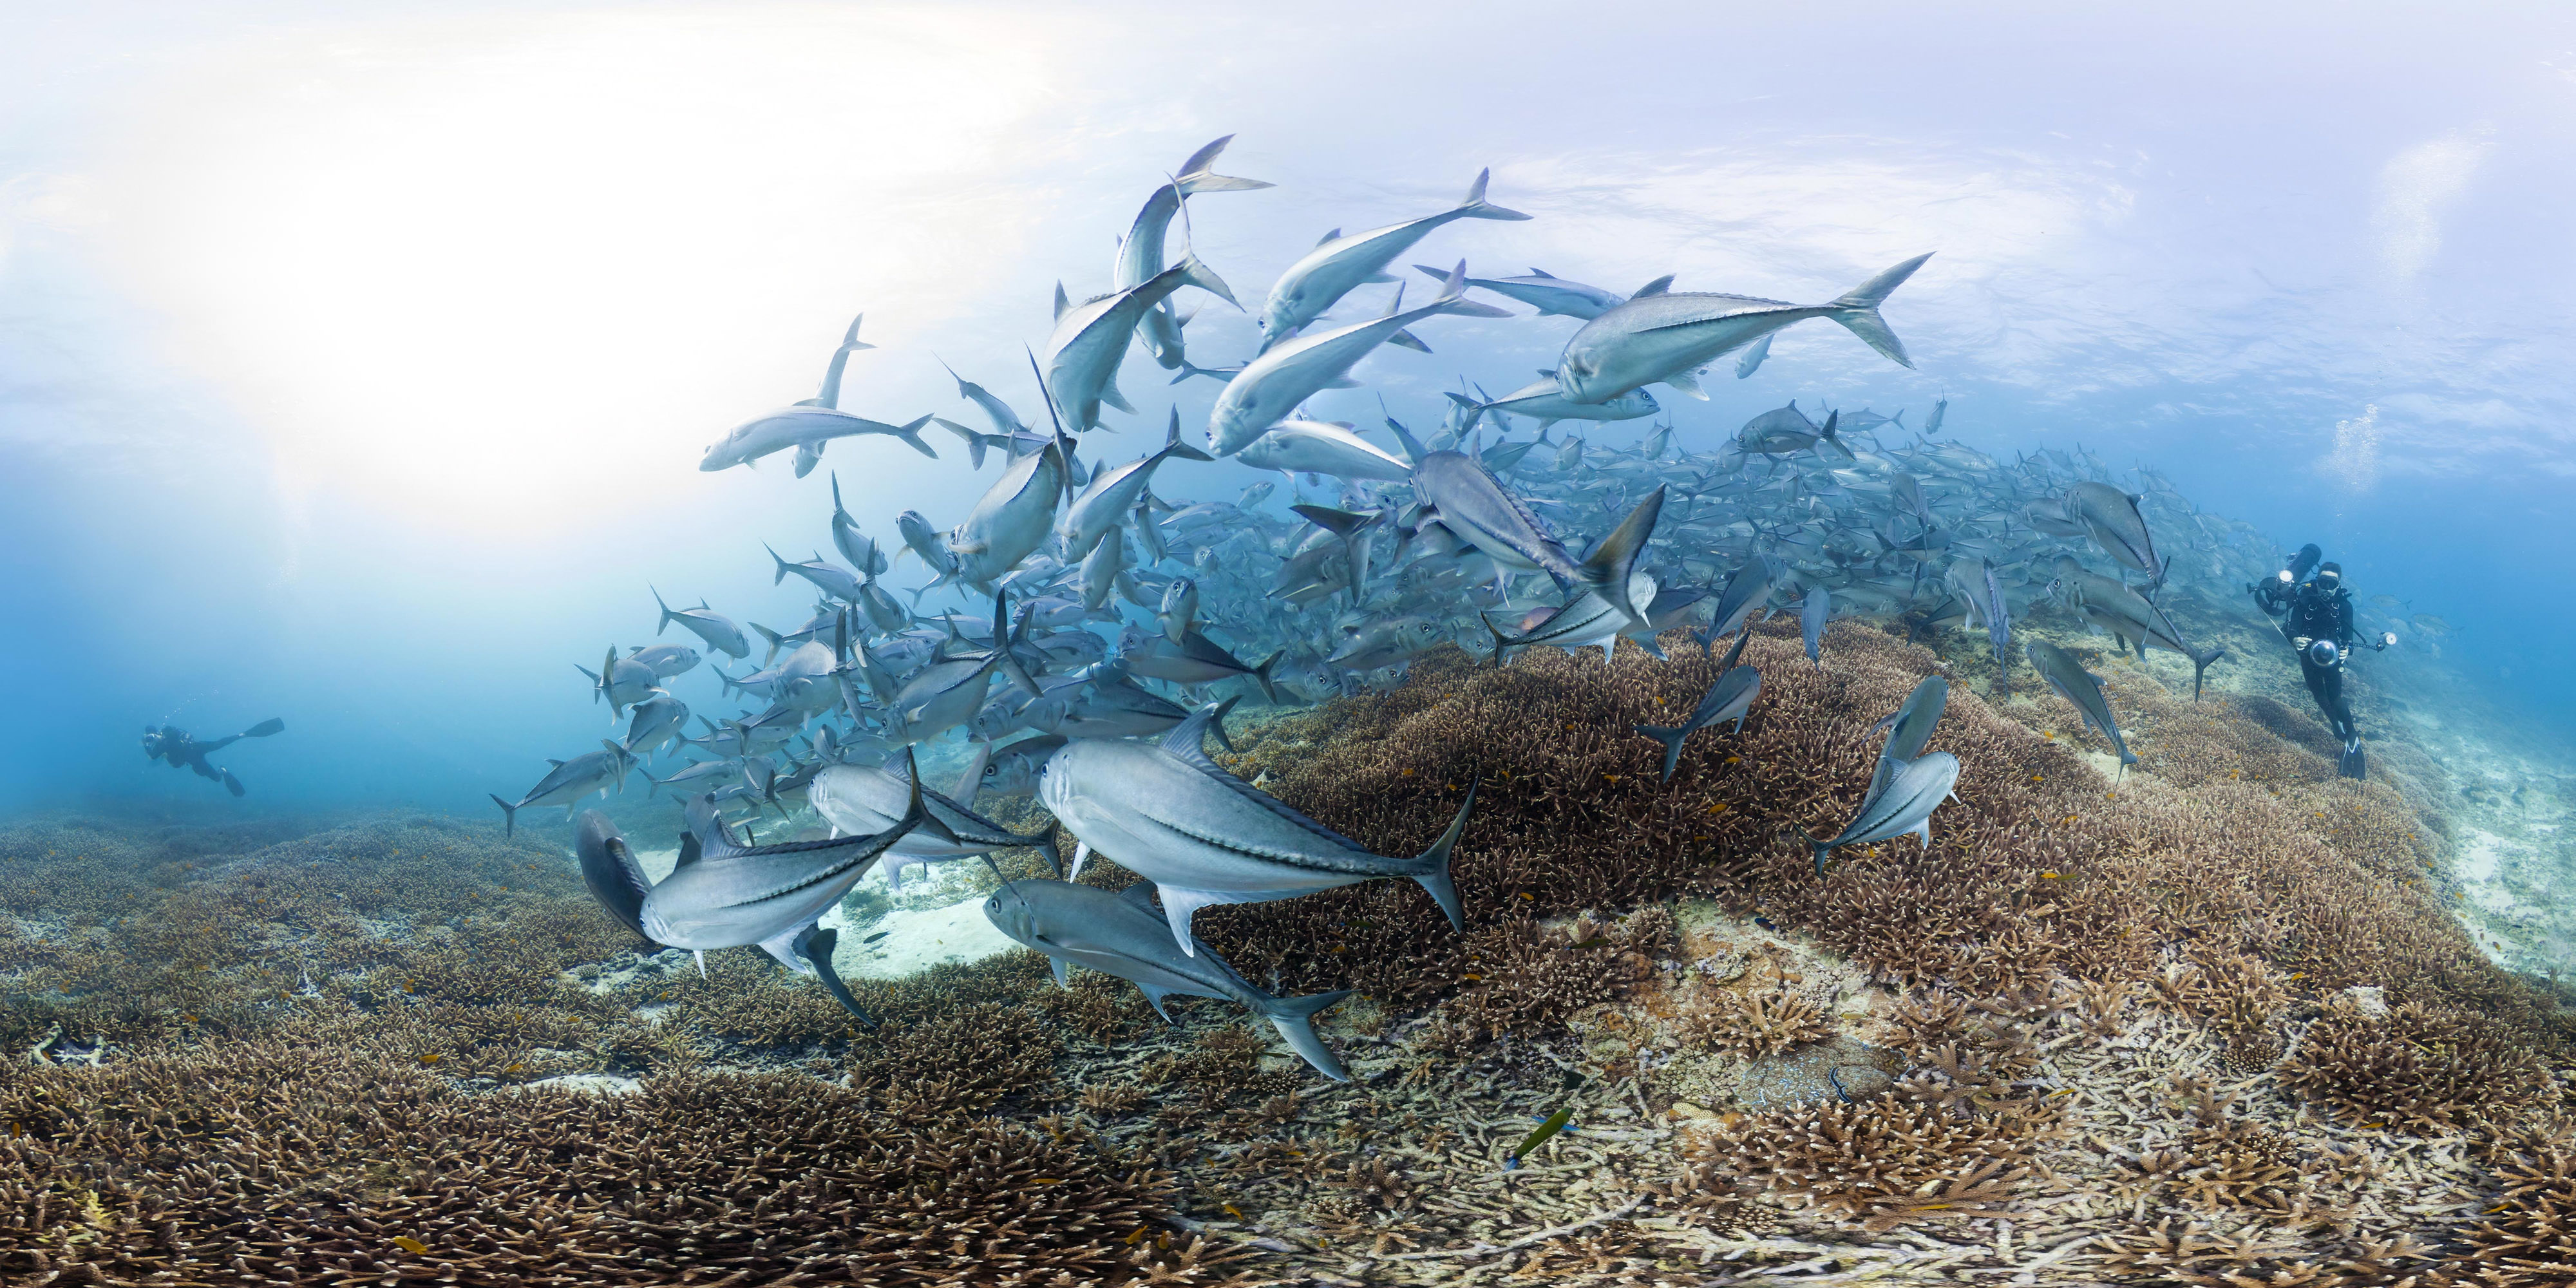 Underwater photo of a school of fish swimming above a reef